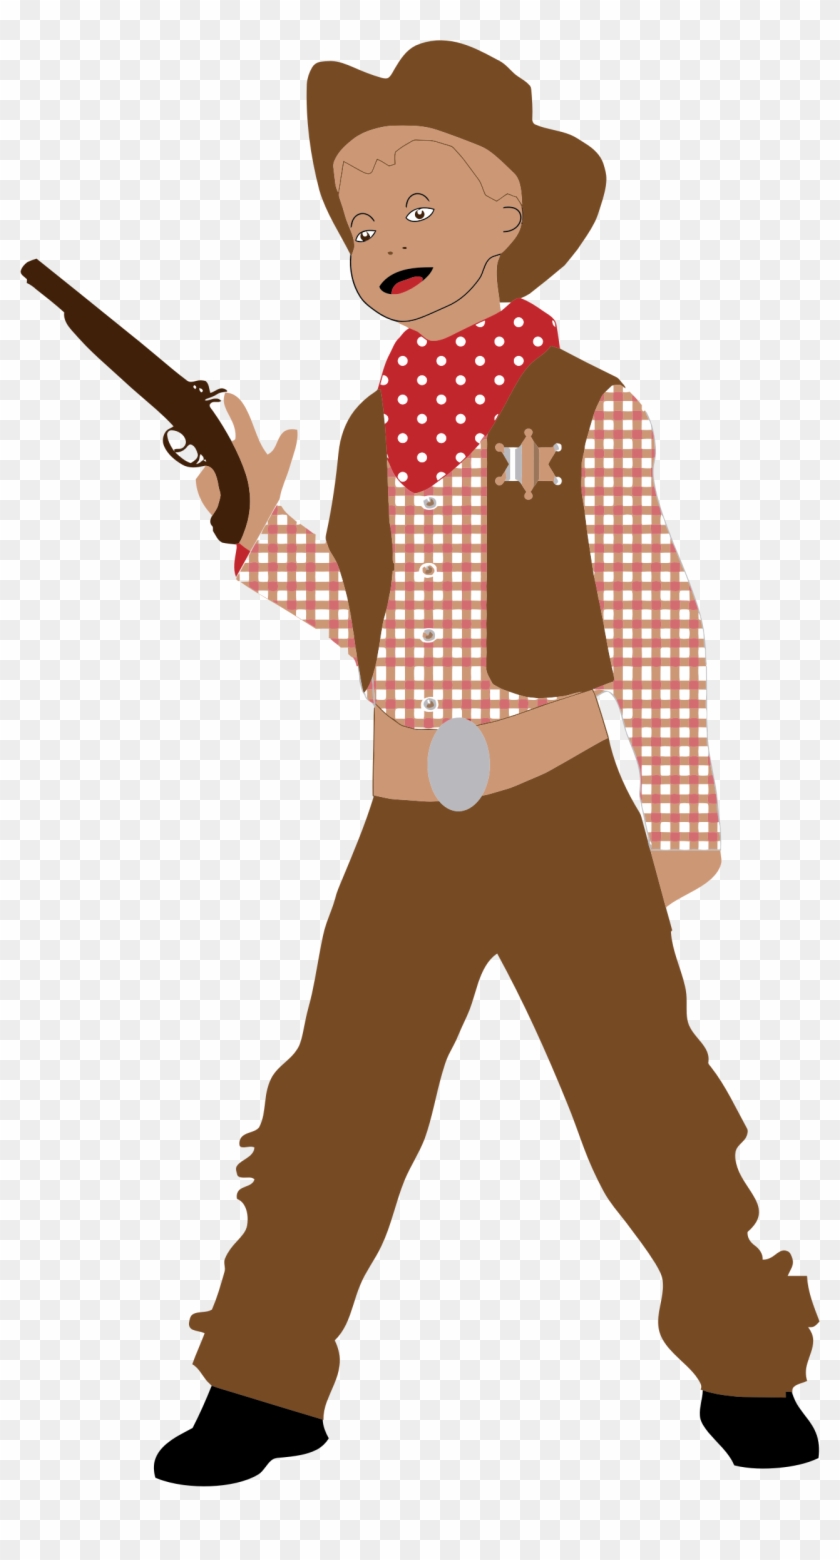 This Free Icons Png Design Of Cowboy Kid Clipart #1194207